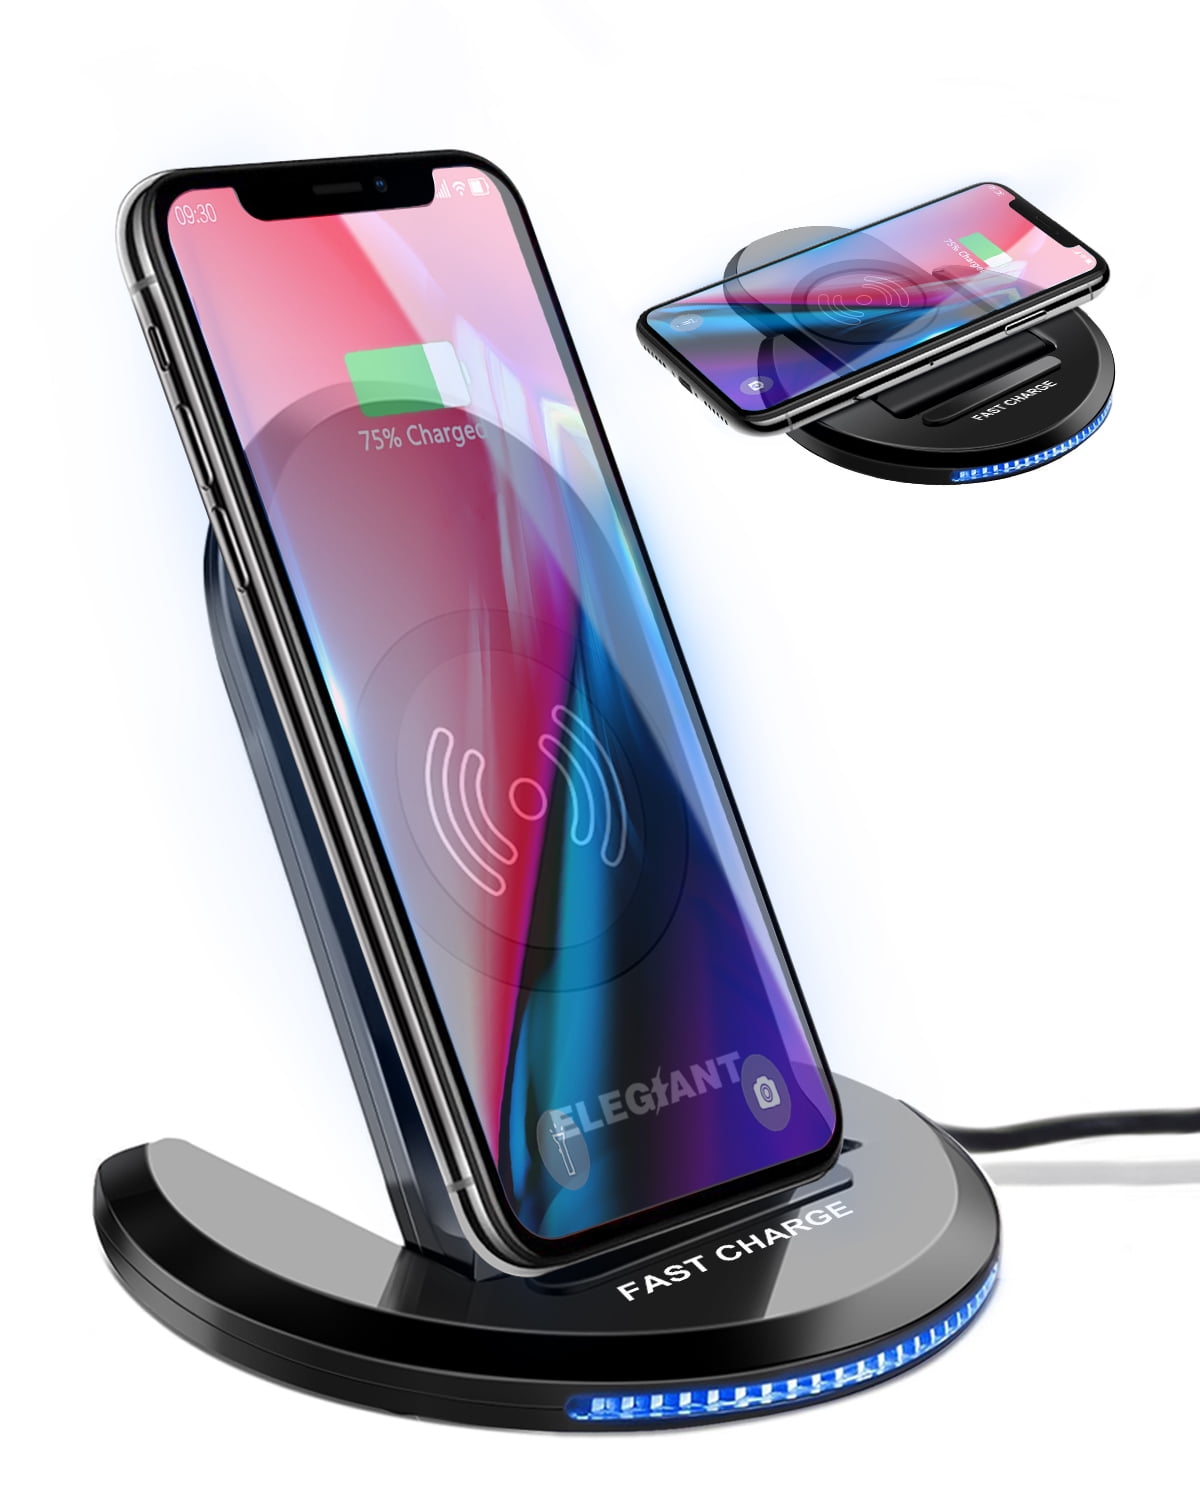 ELEGIANT Wireless Charger, 15W Qi Fast Wireless Charging Stand 0 to 90  Degrees Adjustable Compatible with iPhone 11/11 Pro Max/XR, Galaxy  S20/S10/S9/S8/S7 Edge/Note 10+ 